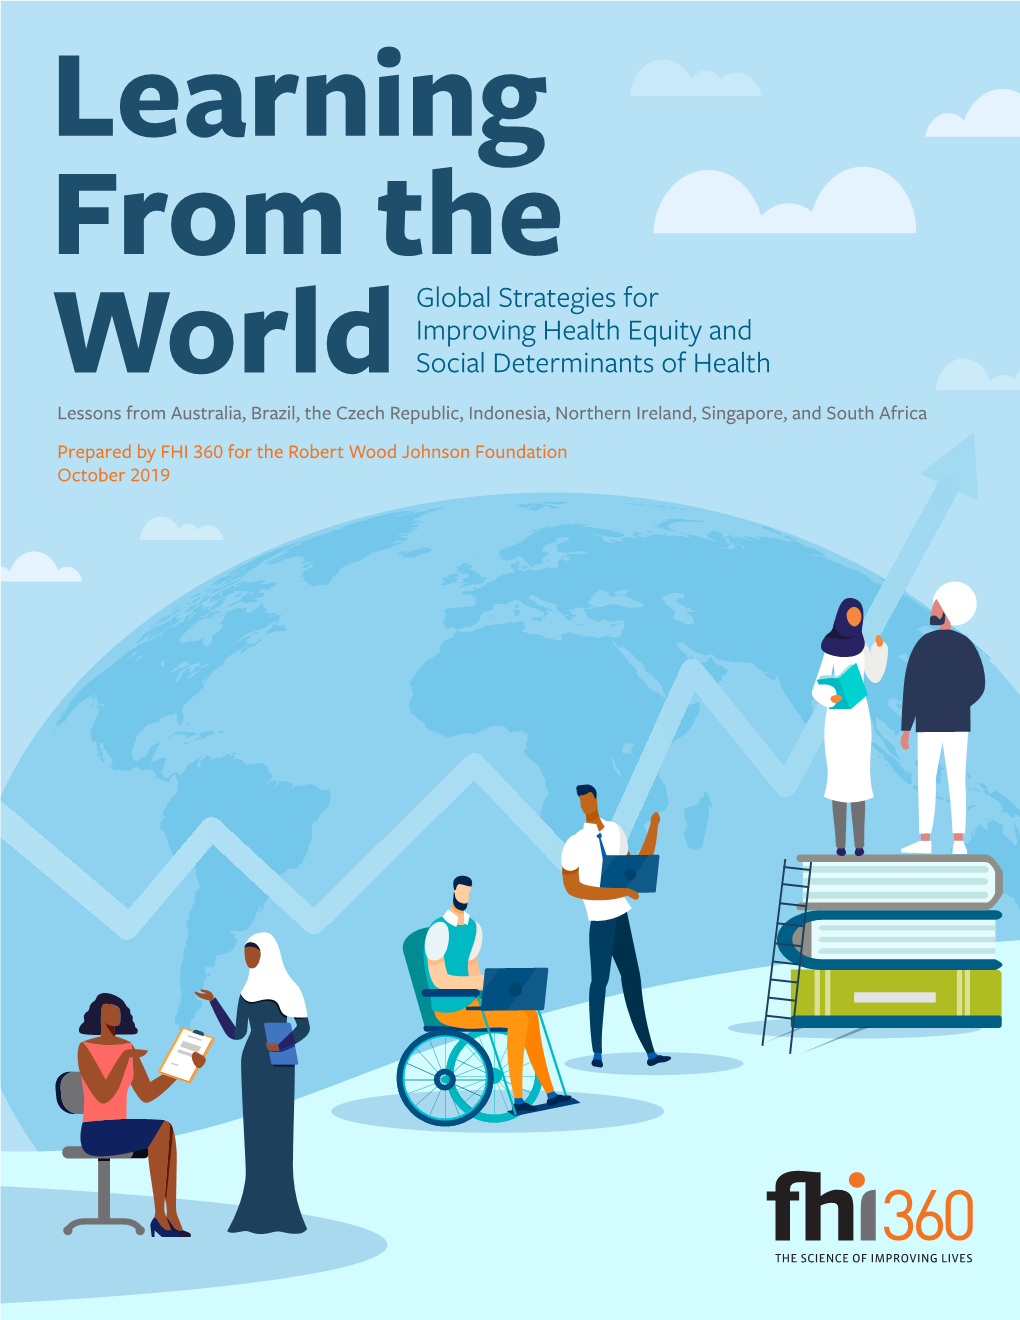 LEARNING from the WORLD: Global Strategies for Improving Health Equity and Social Determinants of Health